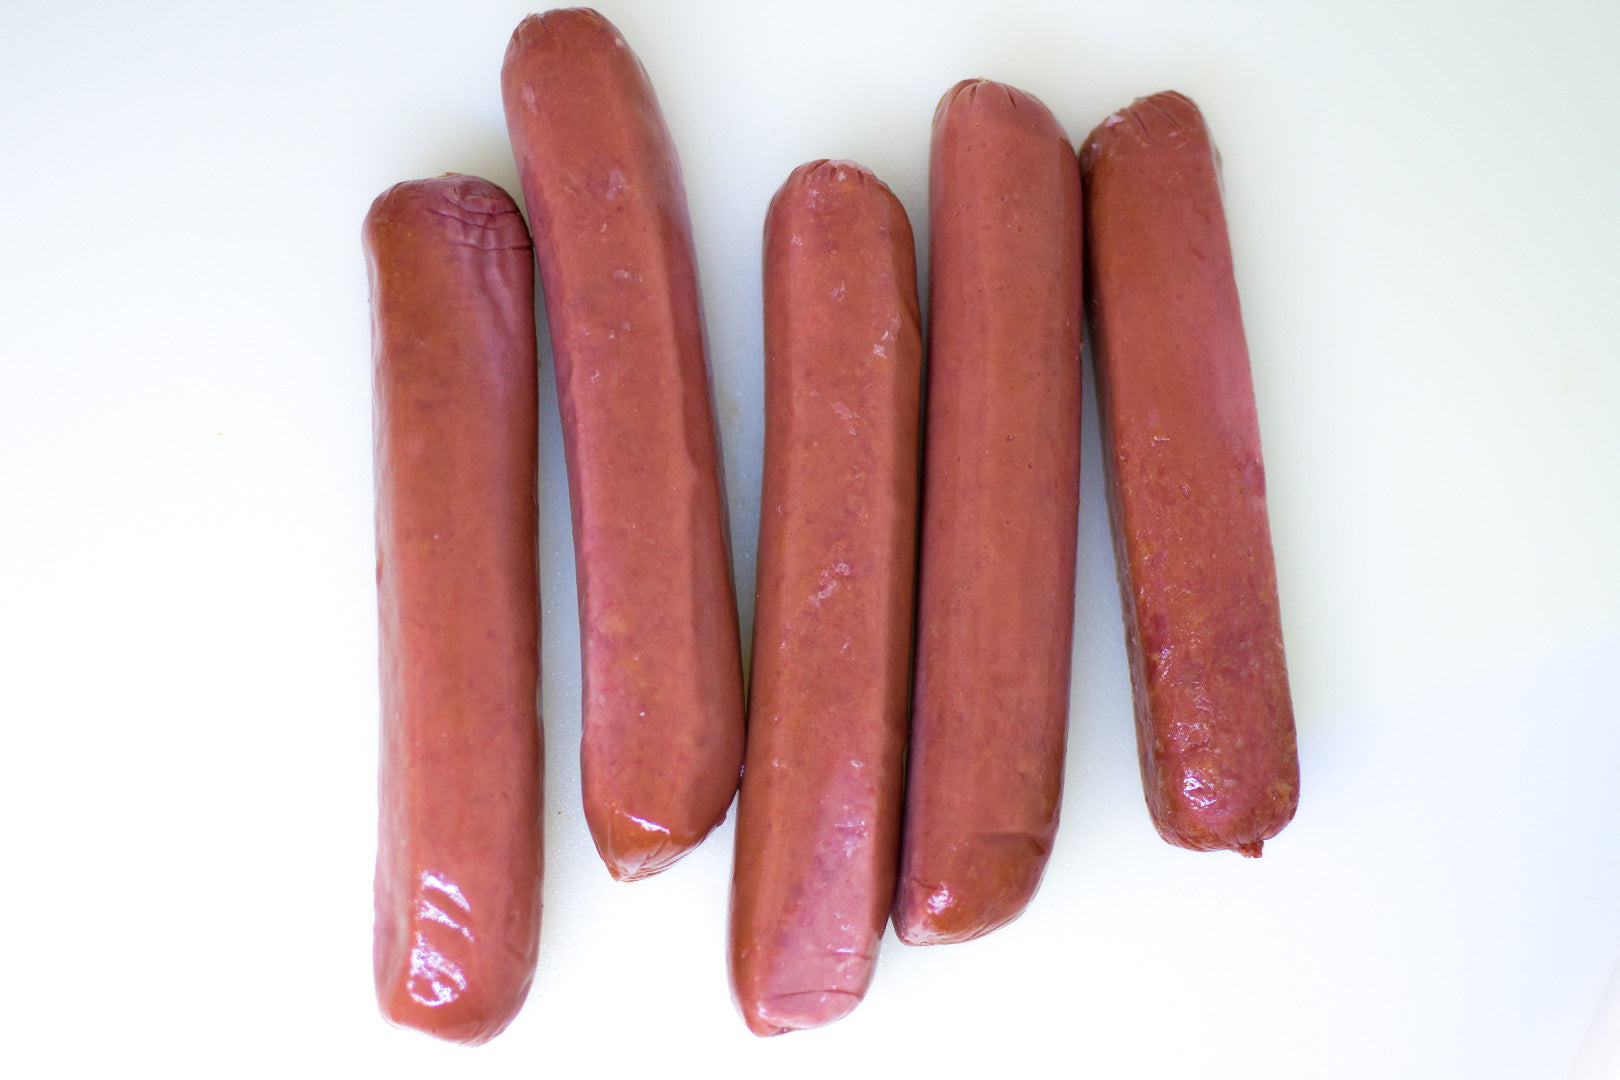 Skinless Hot Dogs